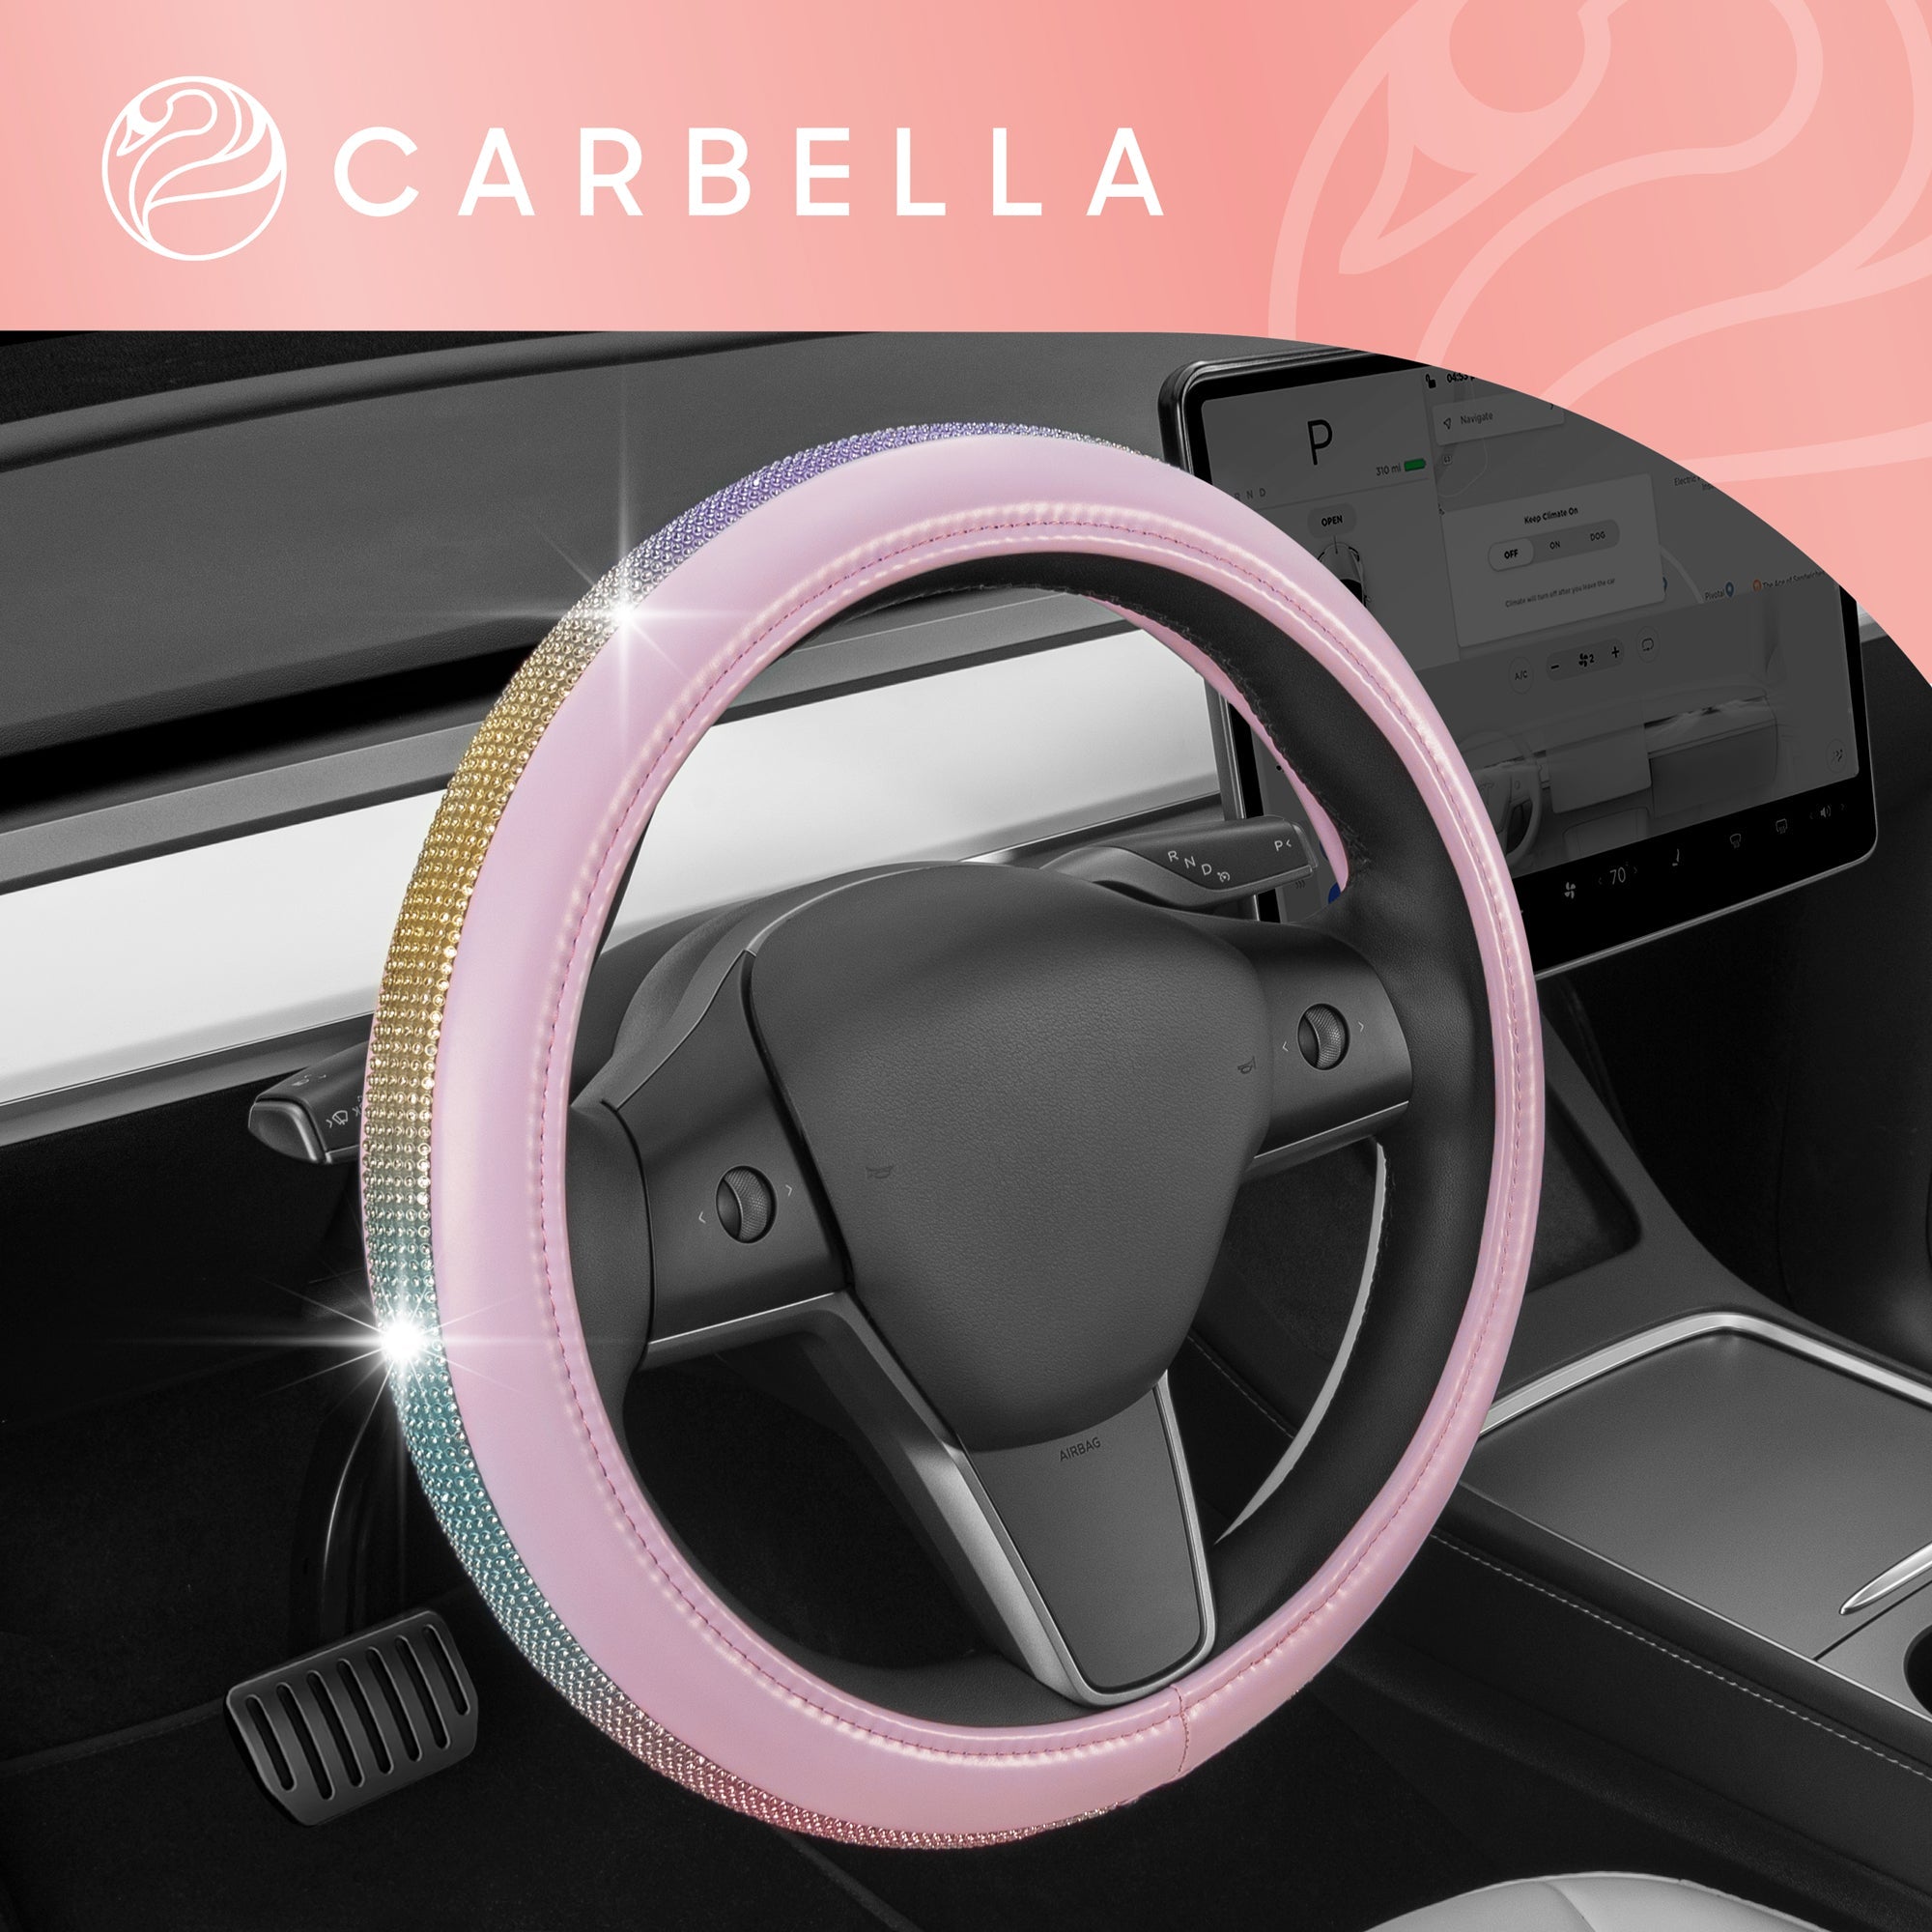 Carbella Pink Diamond Bling Steering Wheel Cover,Standard 15 Inch Size Fits Most Vehicles, Cute Faux Leather Car Steering Cover with Rhinestone Crystal, Car Accessories for Women - Pink:#EDCEED